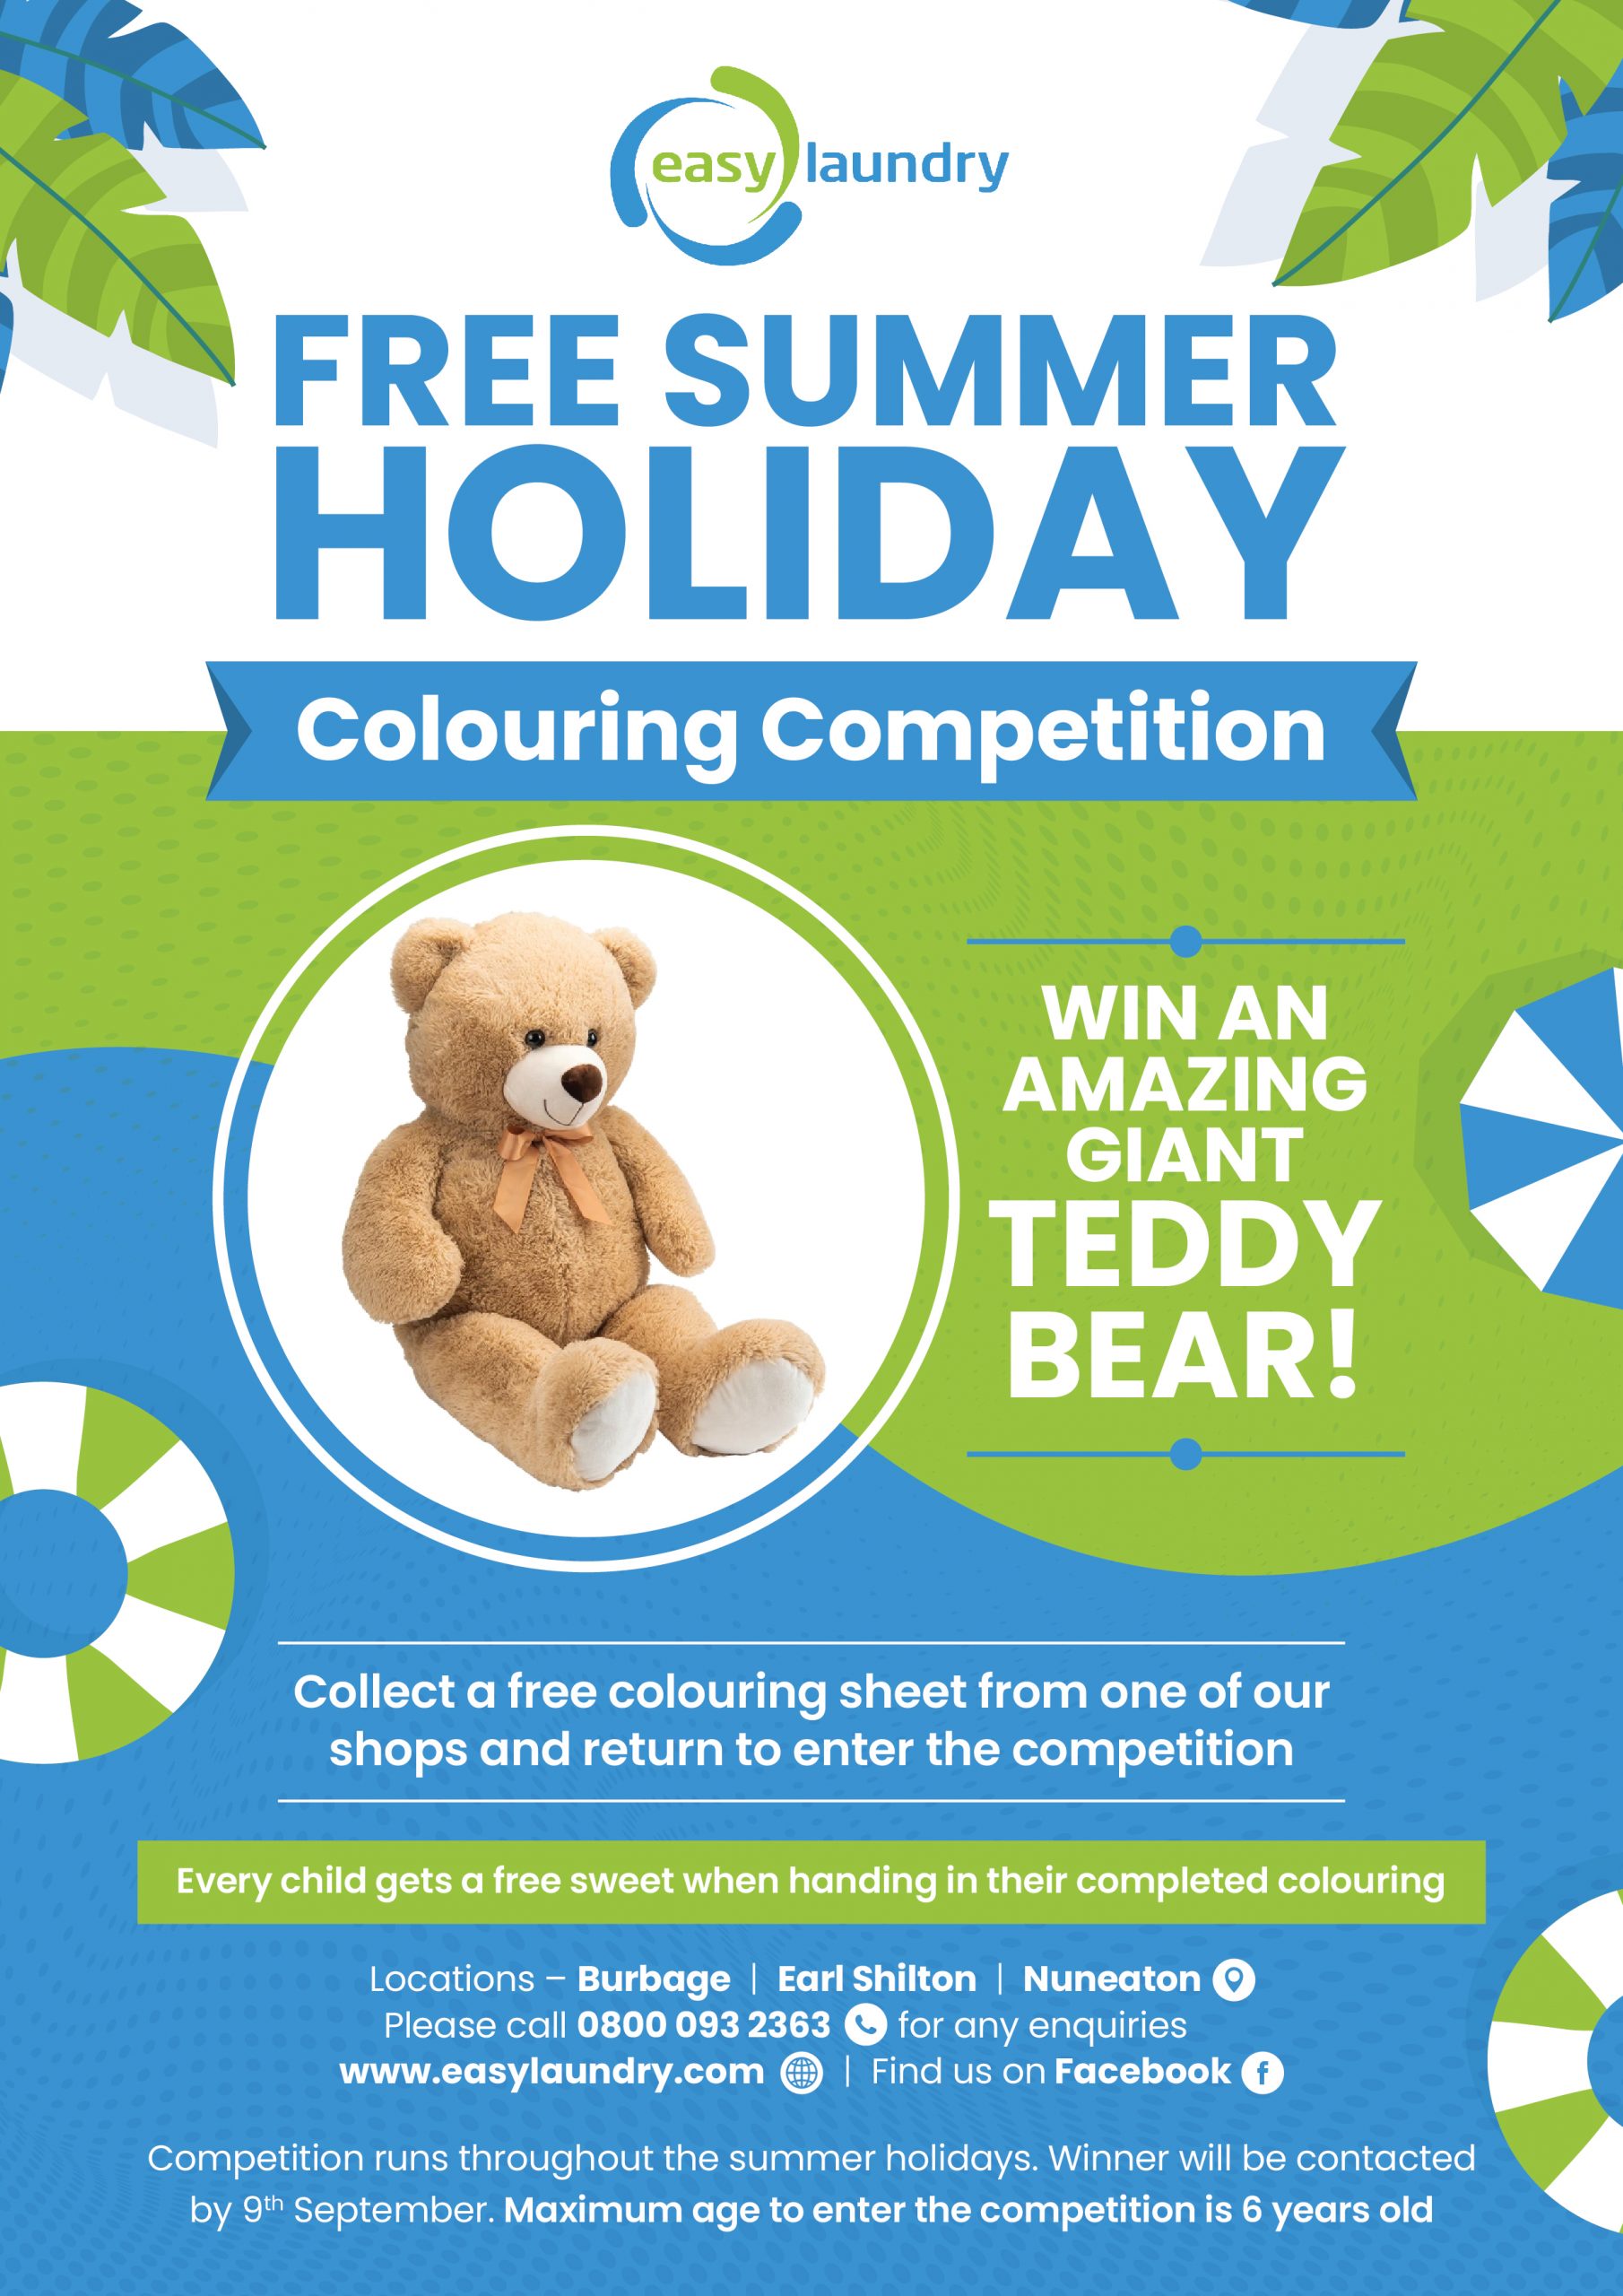 FREE Summer Holiday Colouring Competition